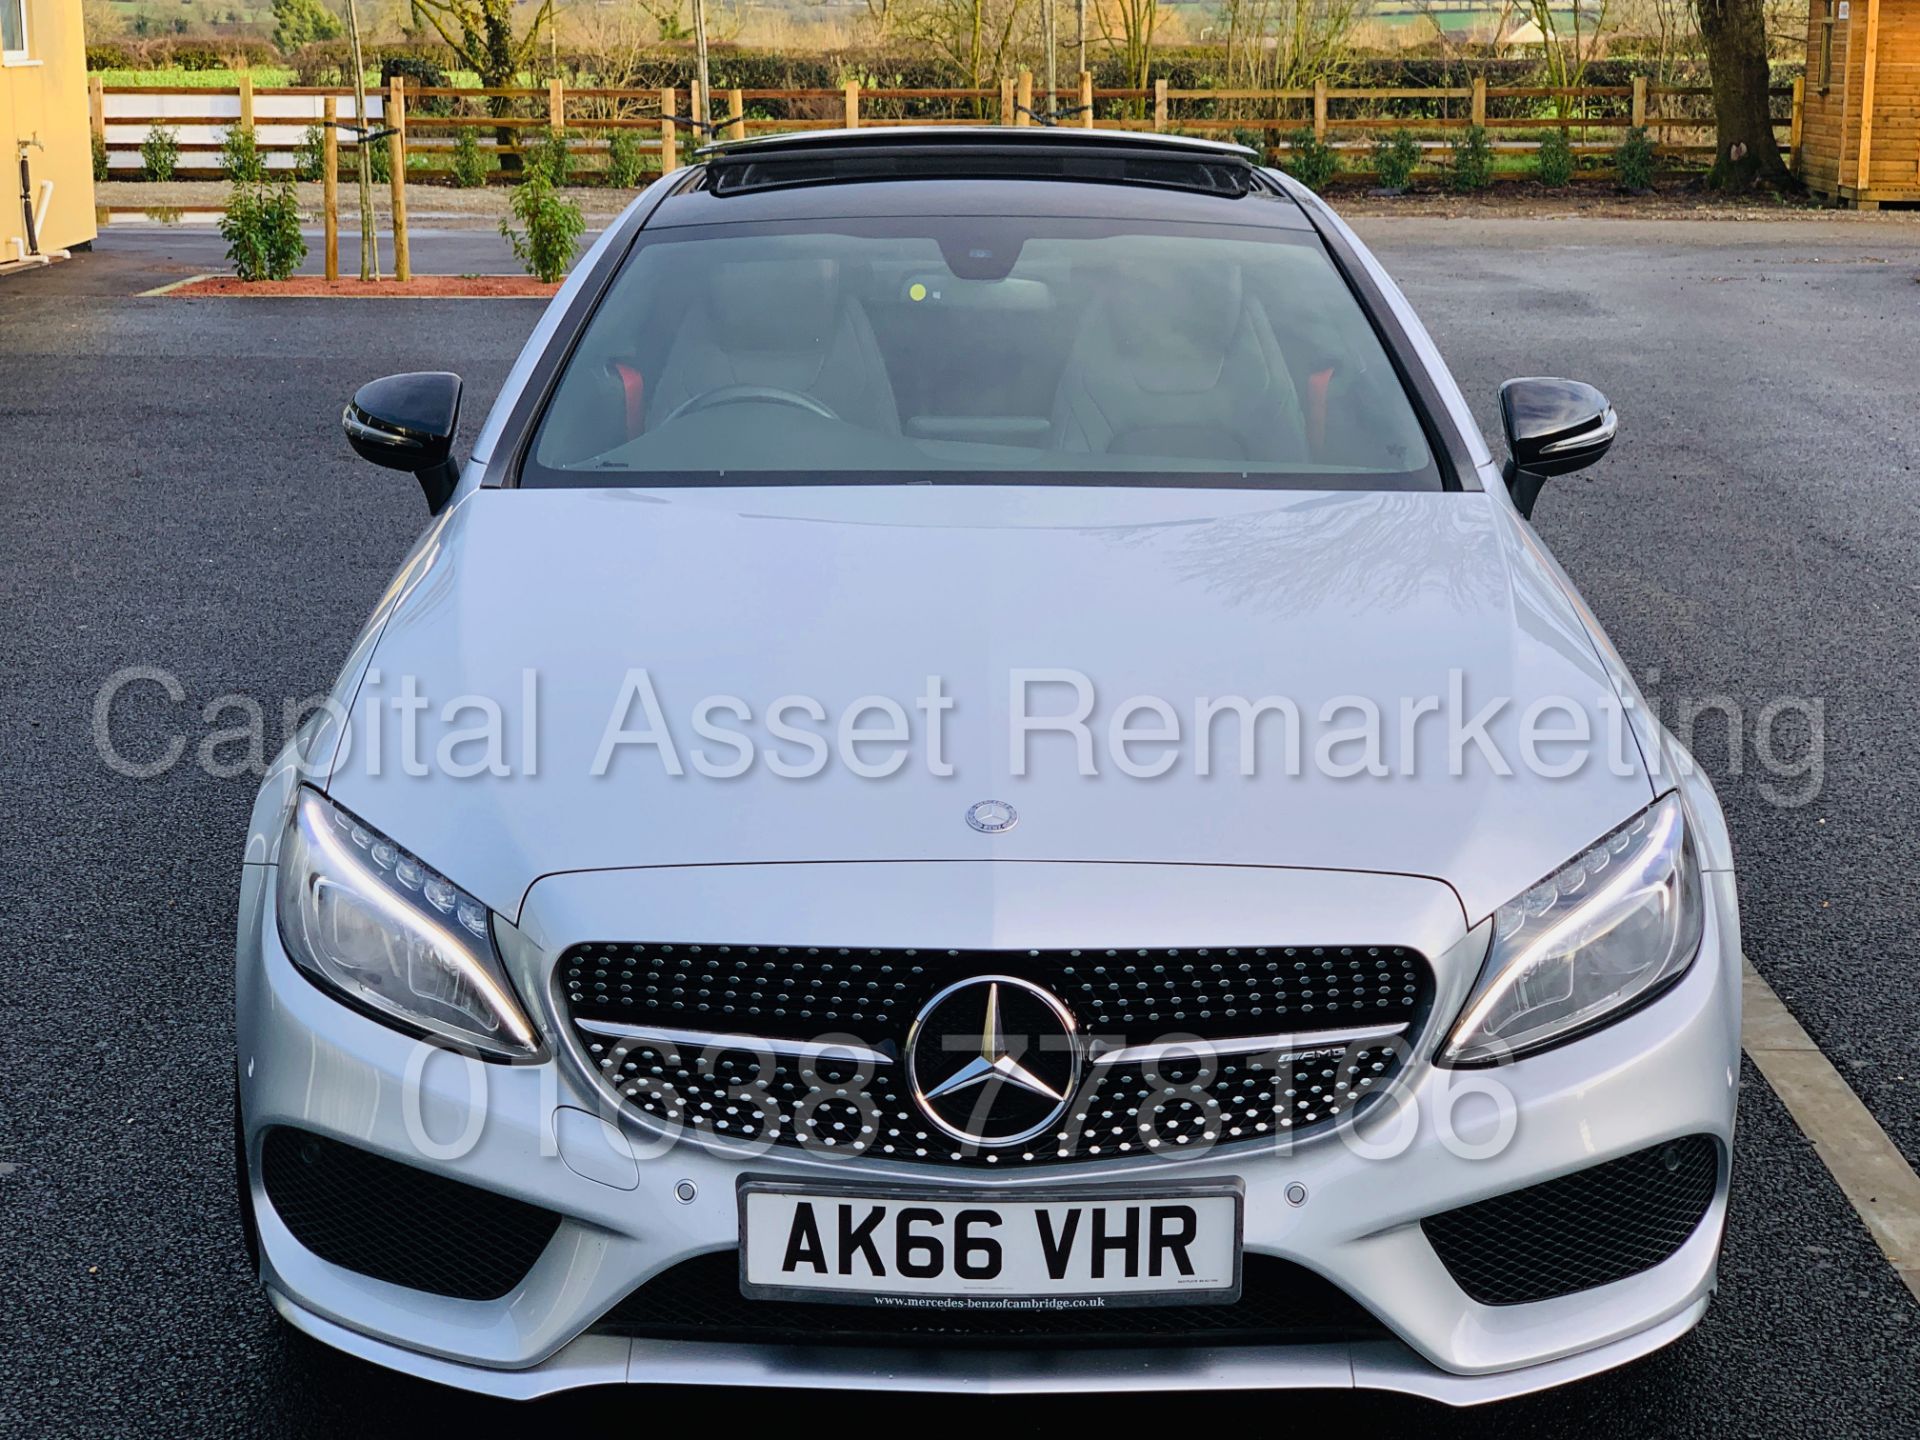 MERCEDES-BENZ C43 AMG *PREMIUM 4 MATIC* COUPE (2017) '9-G AUTO - LEATHER - SAT NAV' **FULLY LOADED** - Image 3 of 67